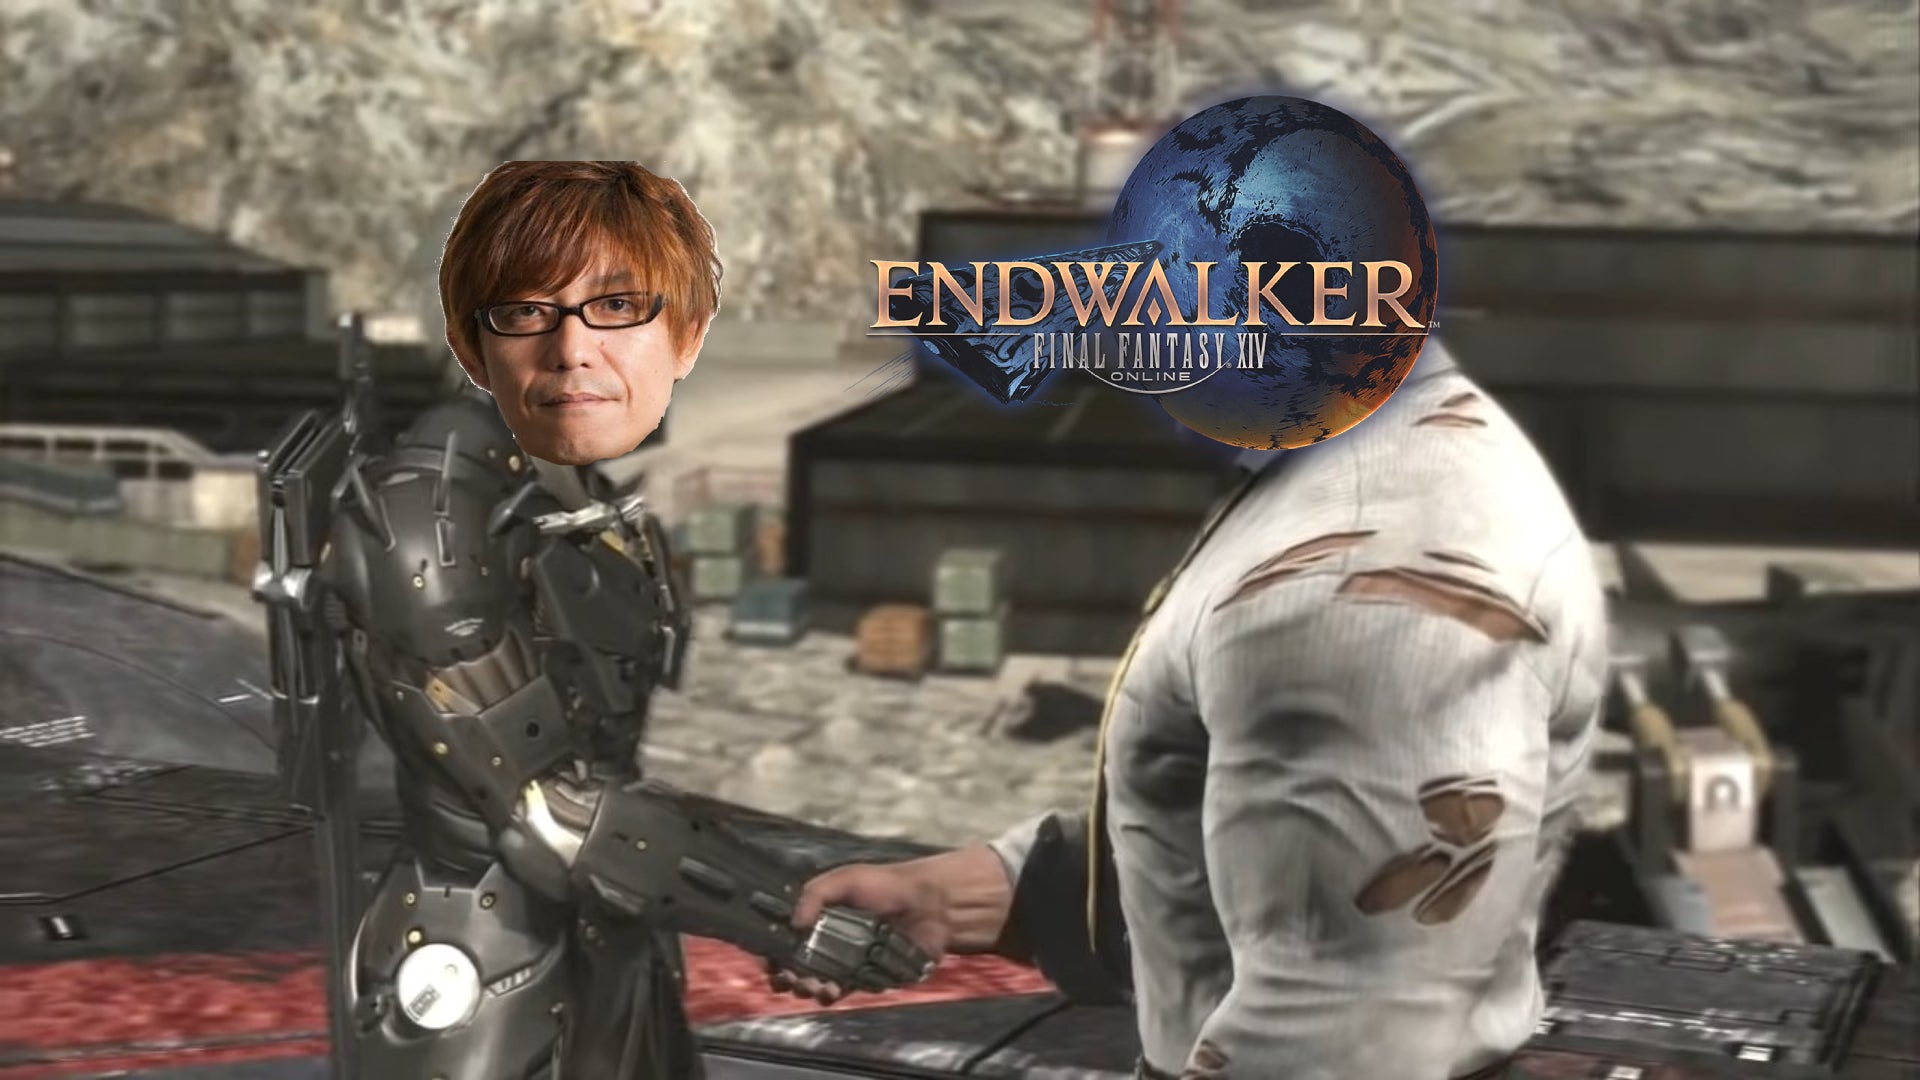 Header for FF14 Raiden server story, with Yoshi P's face photoshopped in.